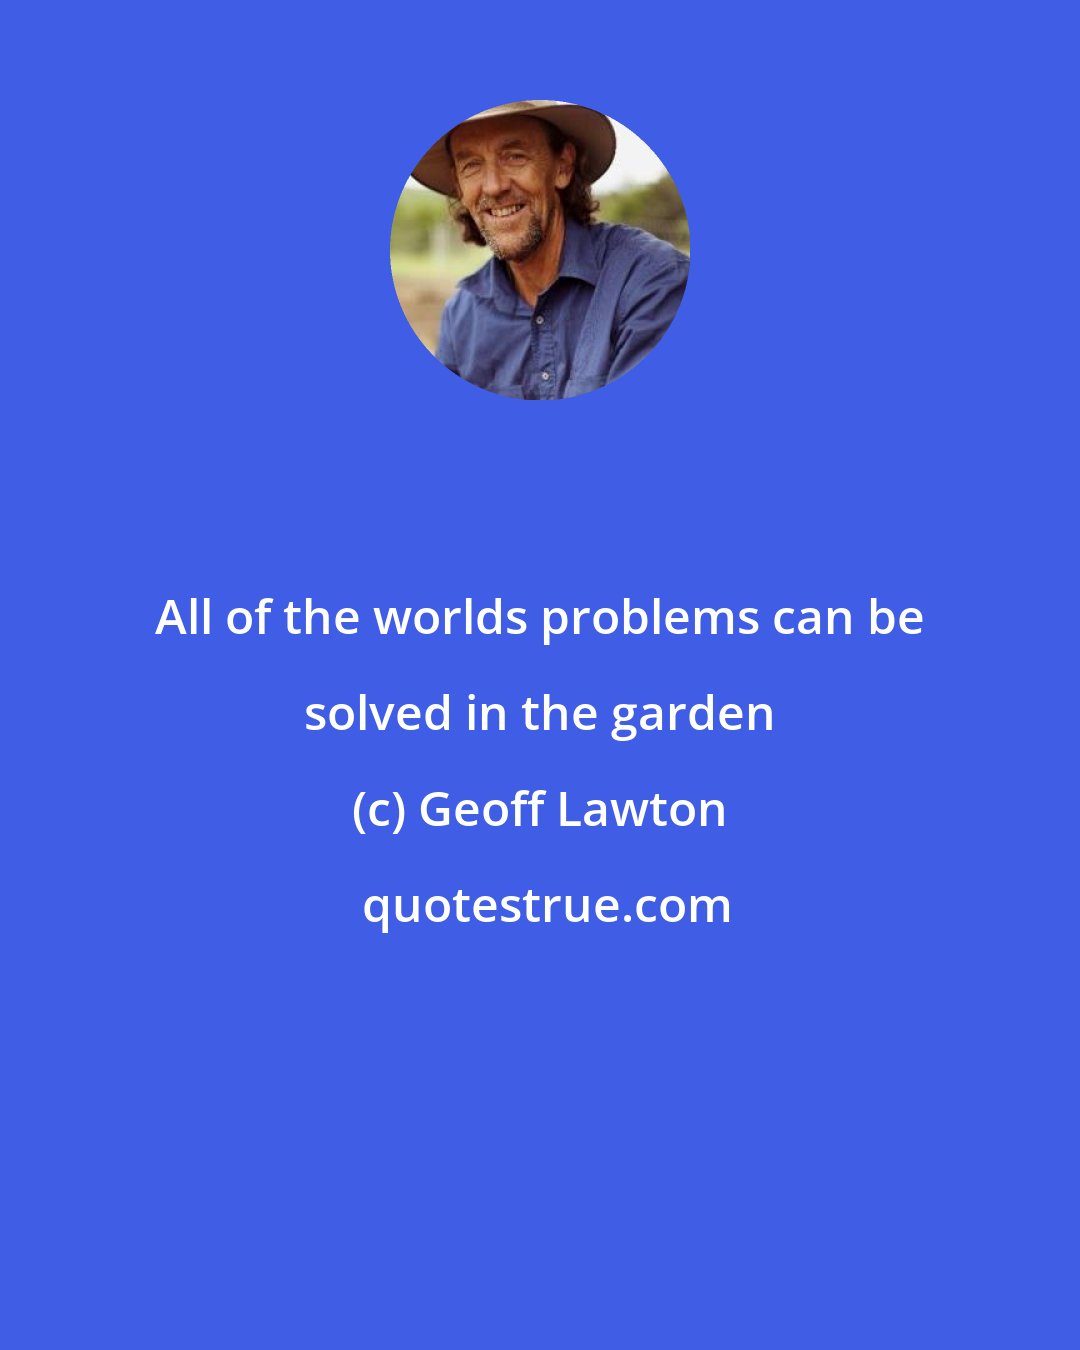 Geoff Lawton: All of the worlds problems can be solved in the garden